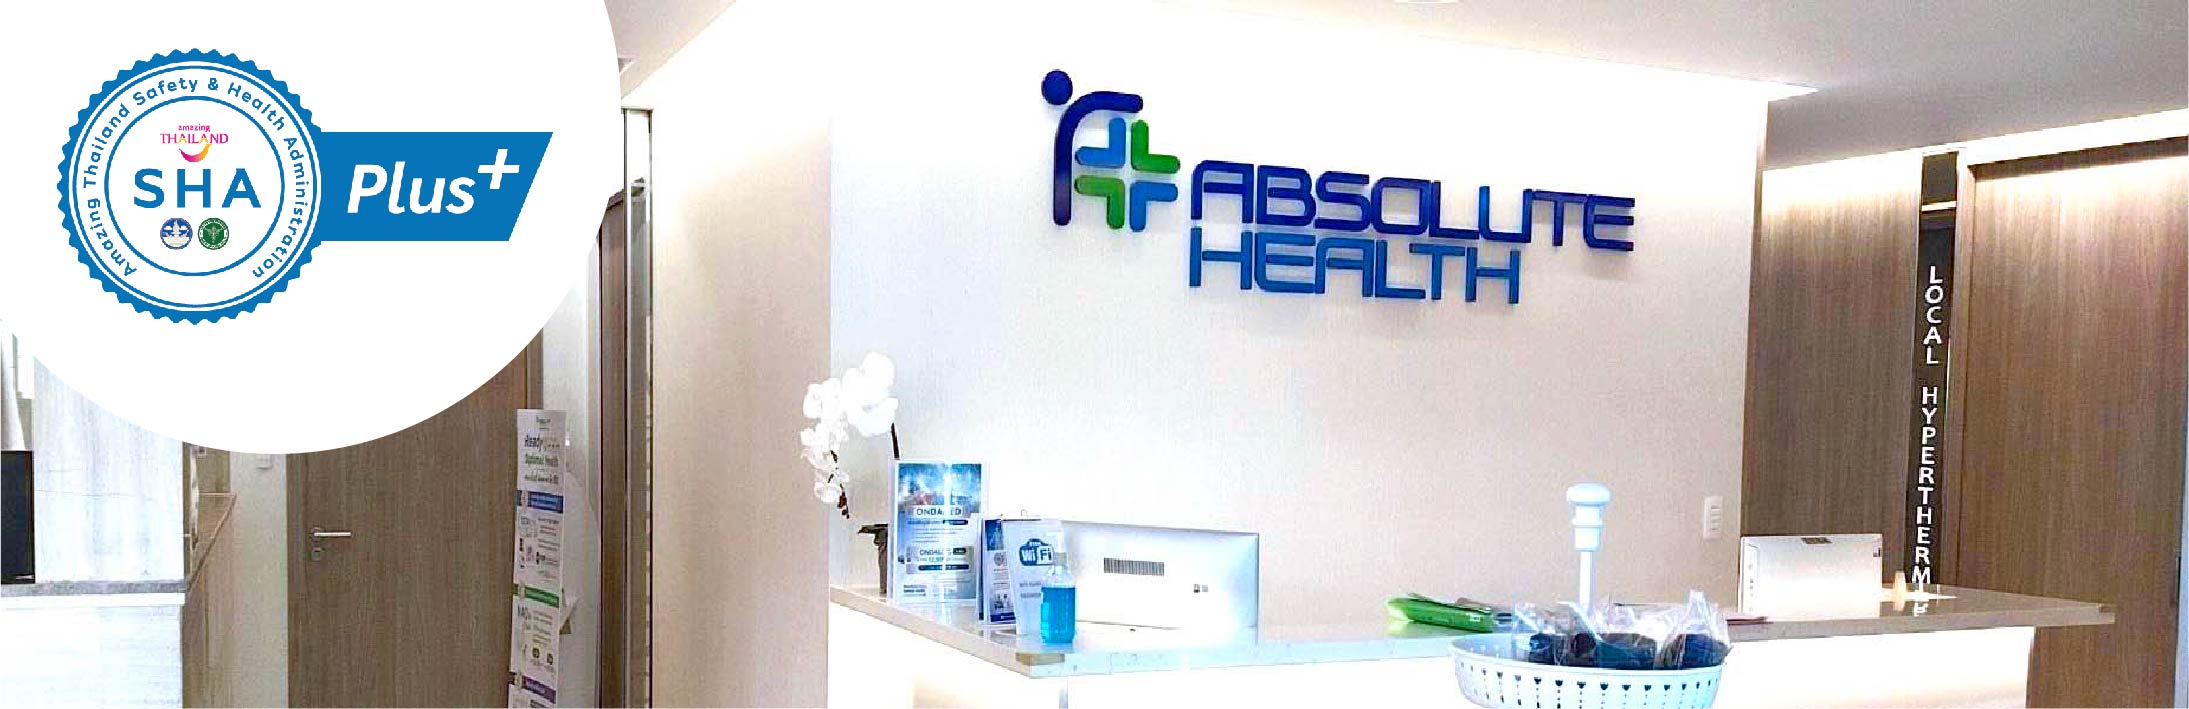 Absolute Health Integrative Medical Center – Certified SHA Plus+ 